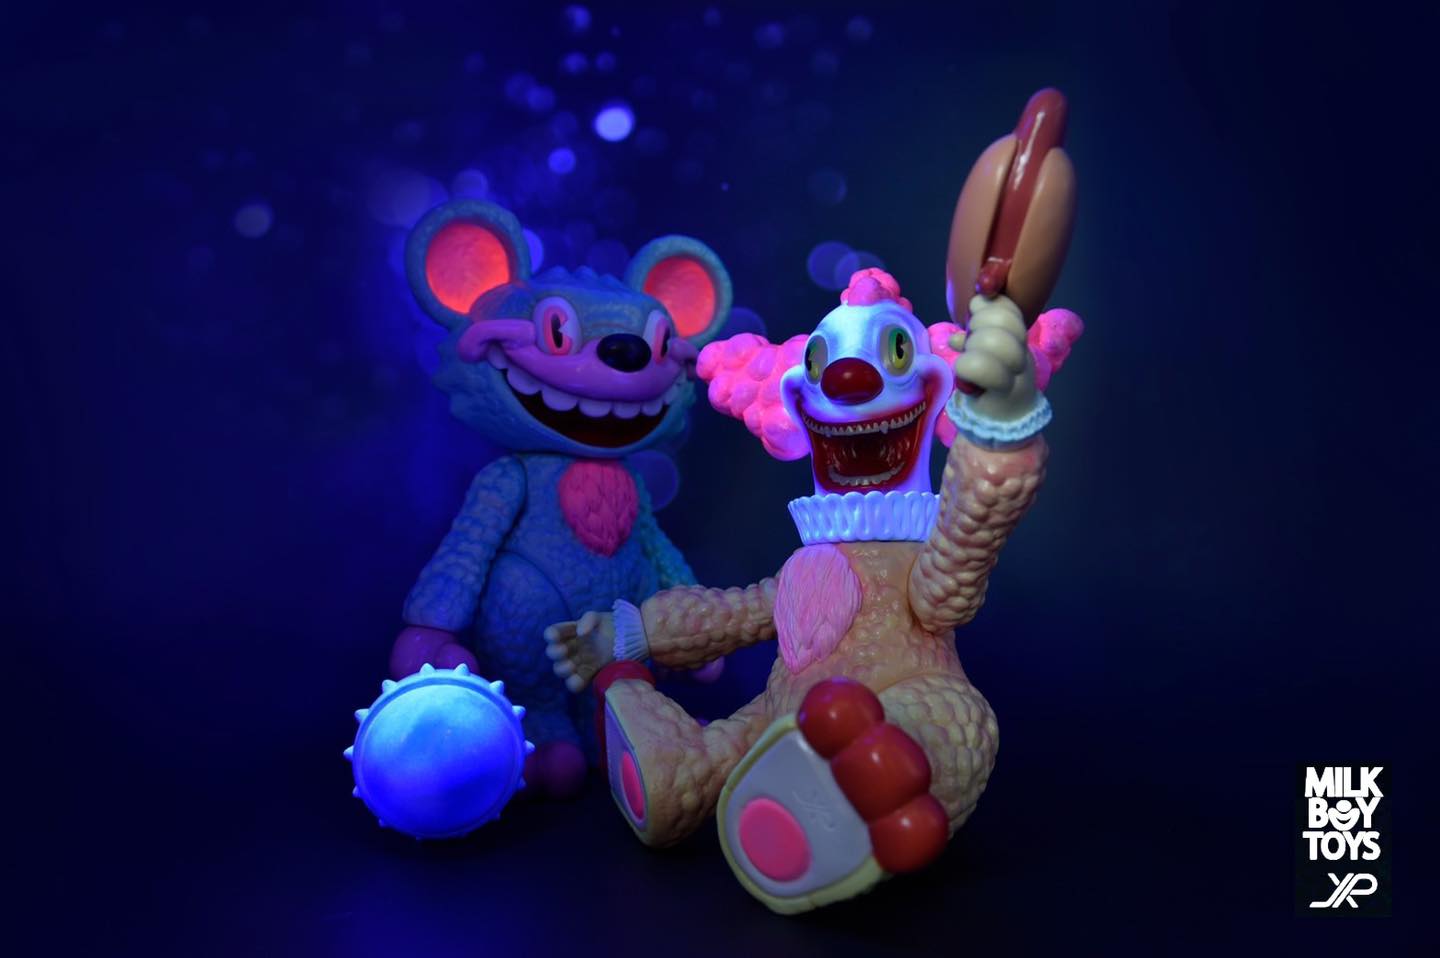 JPX x MILKBOYTOY: IT BEAR 2nd and Mr Wise 2nd - The Toy Chronicle